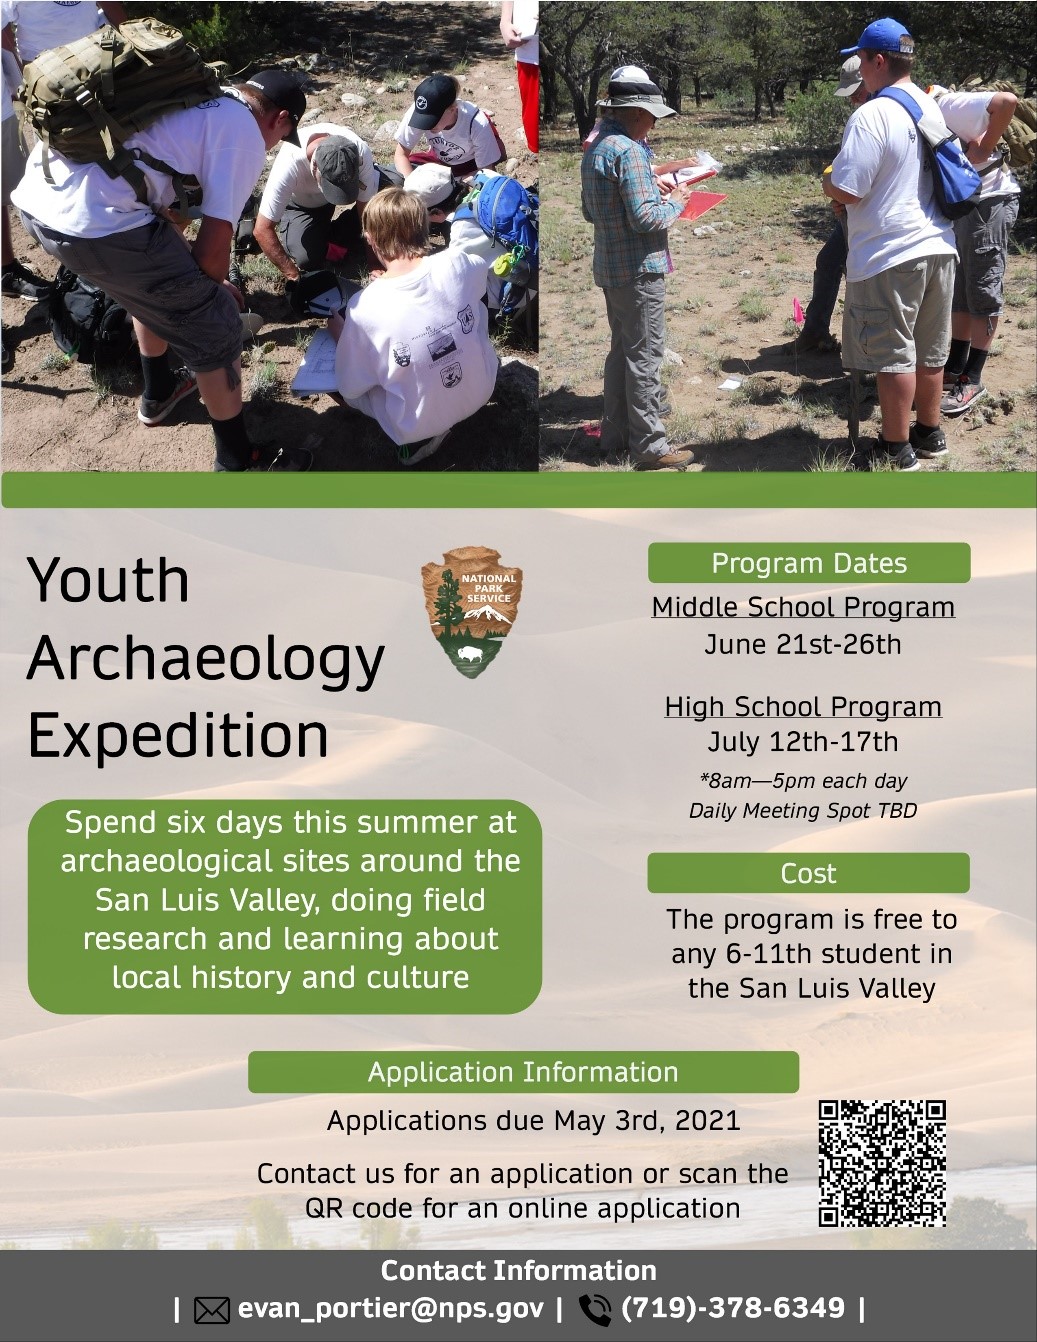 Youth Archeology Expedition Poster